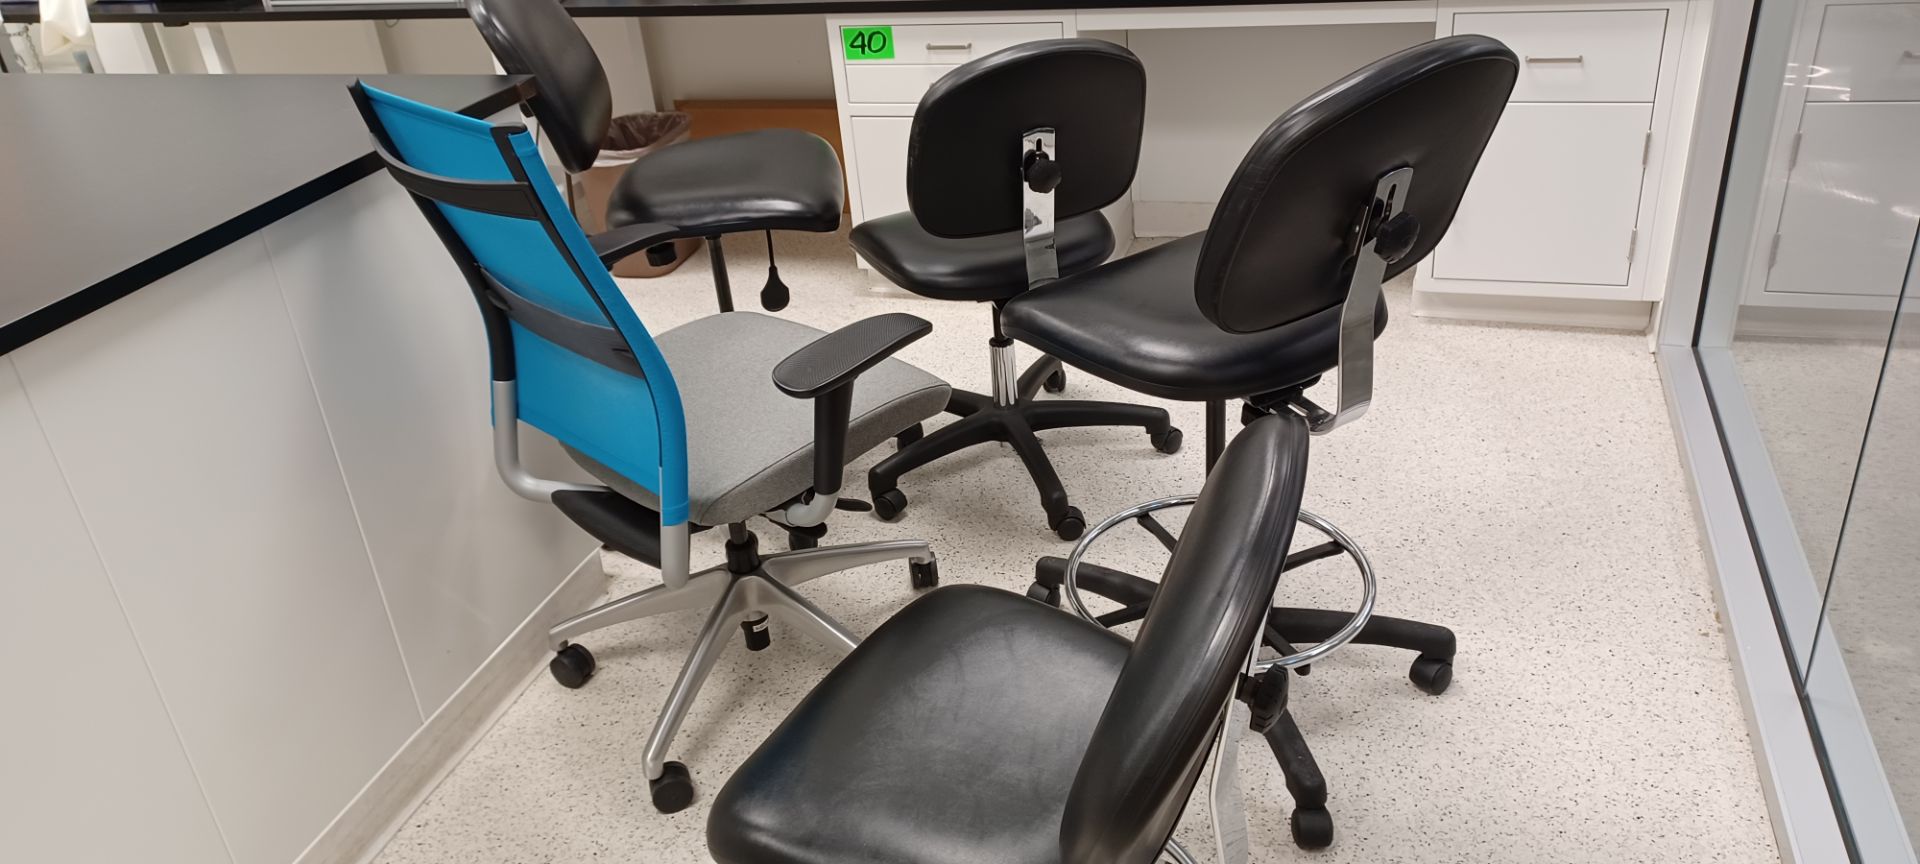 LOT OF 5 LAB CHAIRS